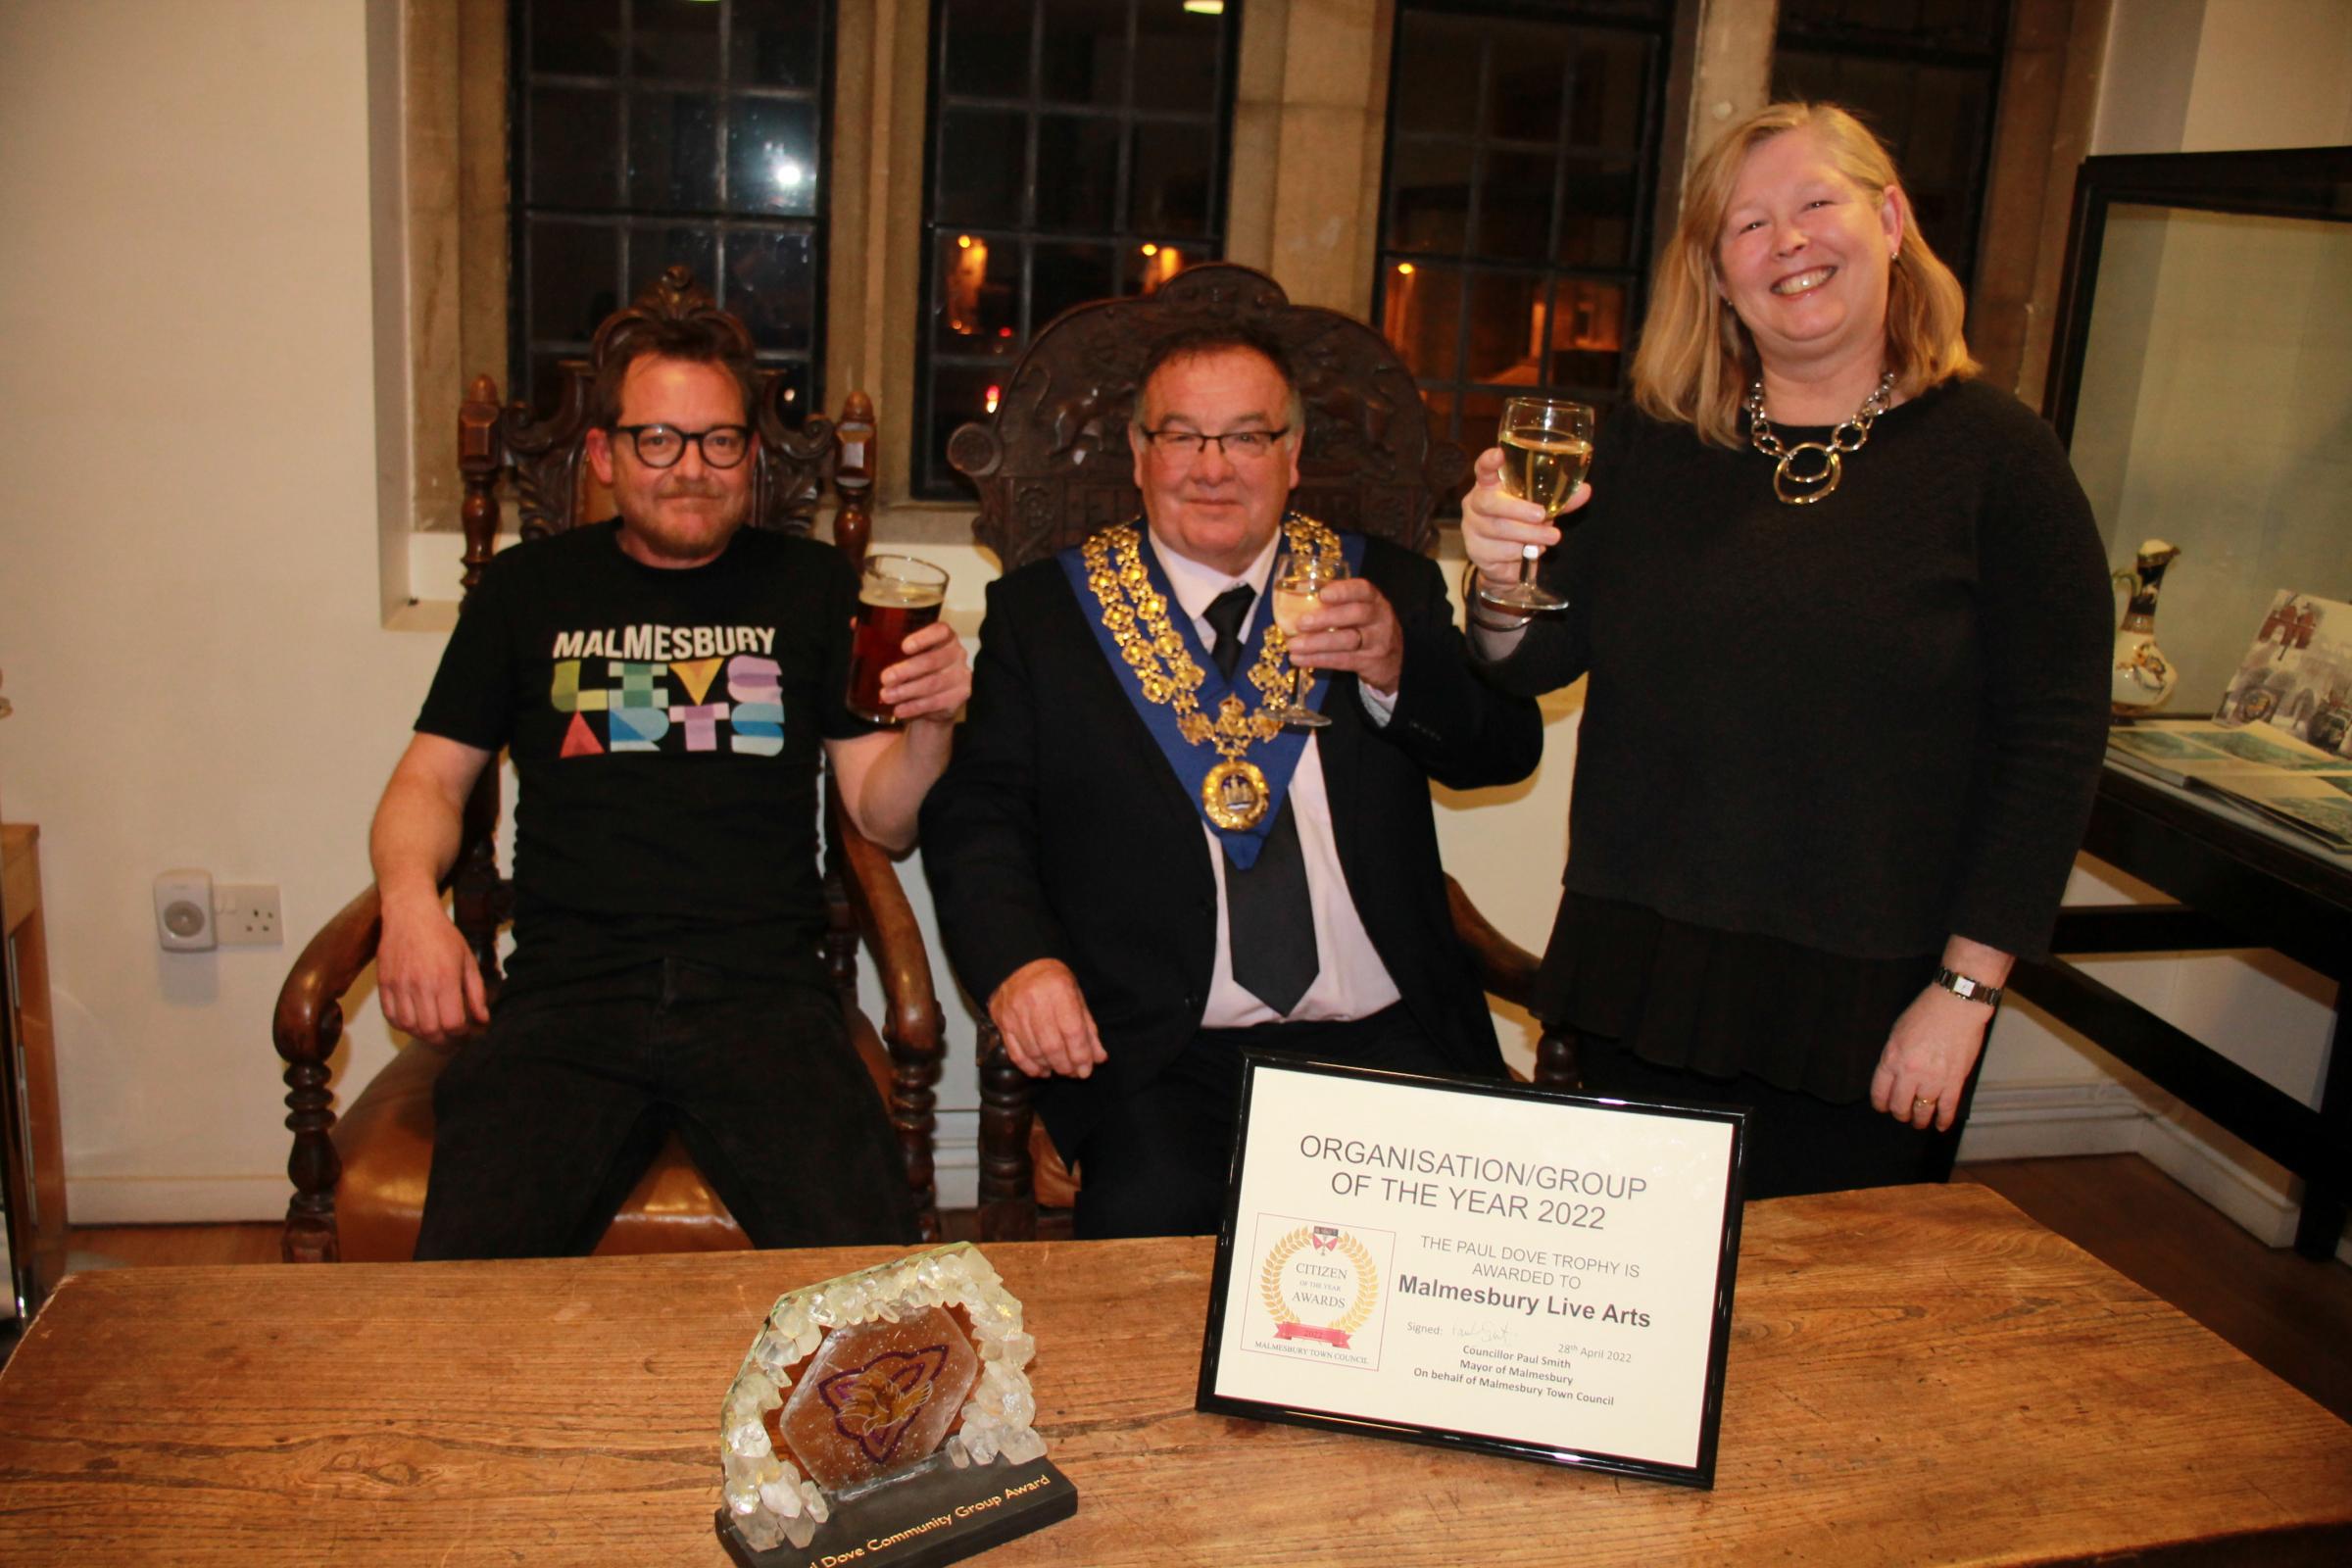 Malmesbury Live Arts were named Organisation of the year 